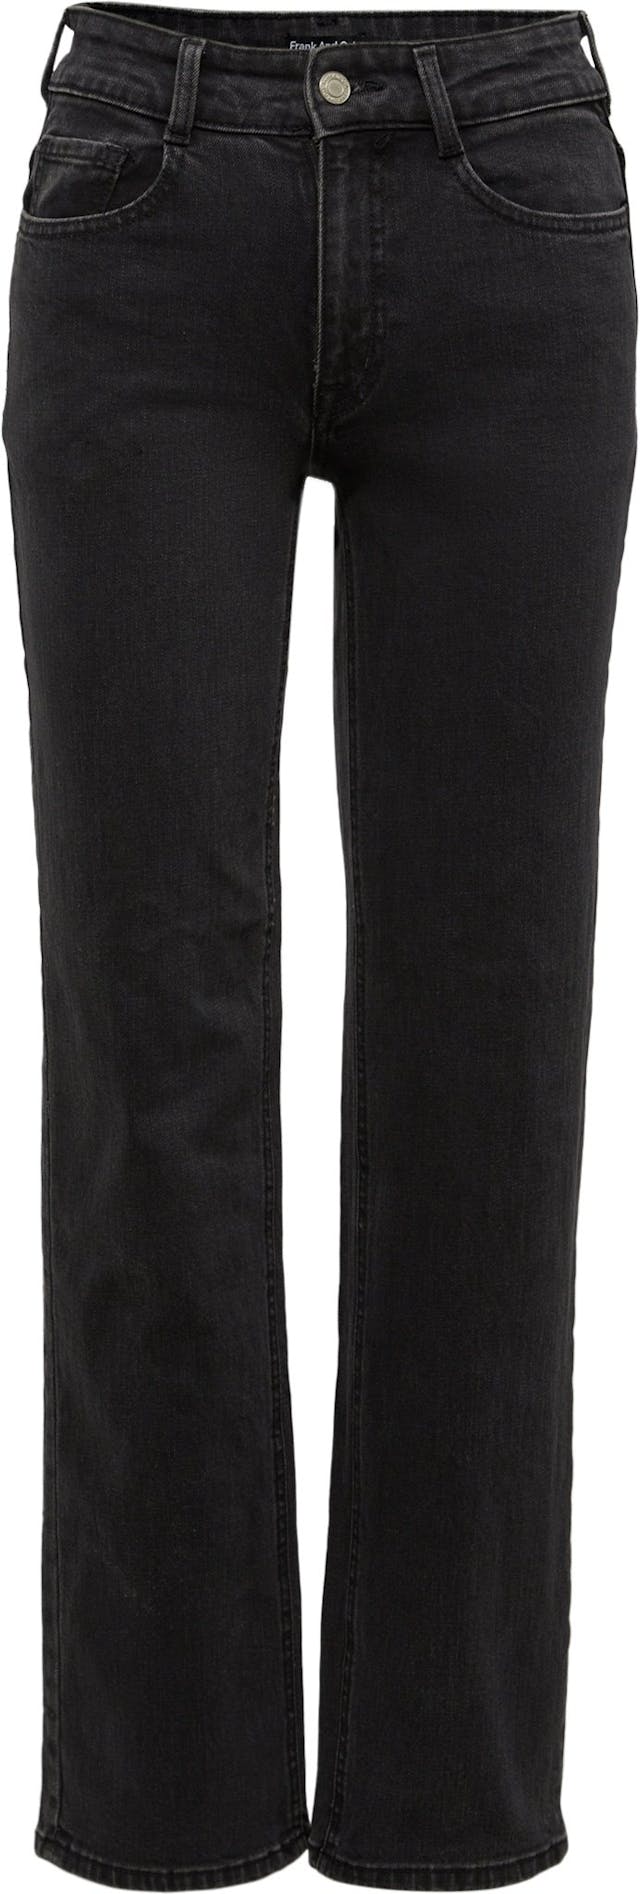 Product image for High Rise Marianne Relaxed Straight Fit Jean - Women's